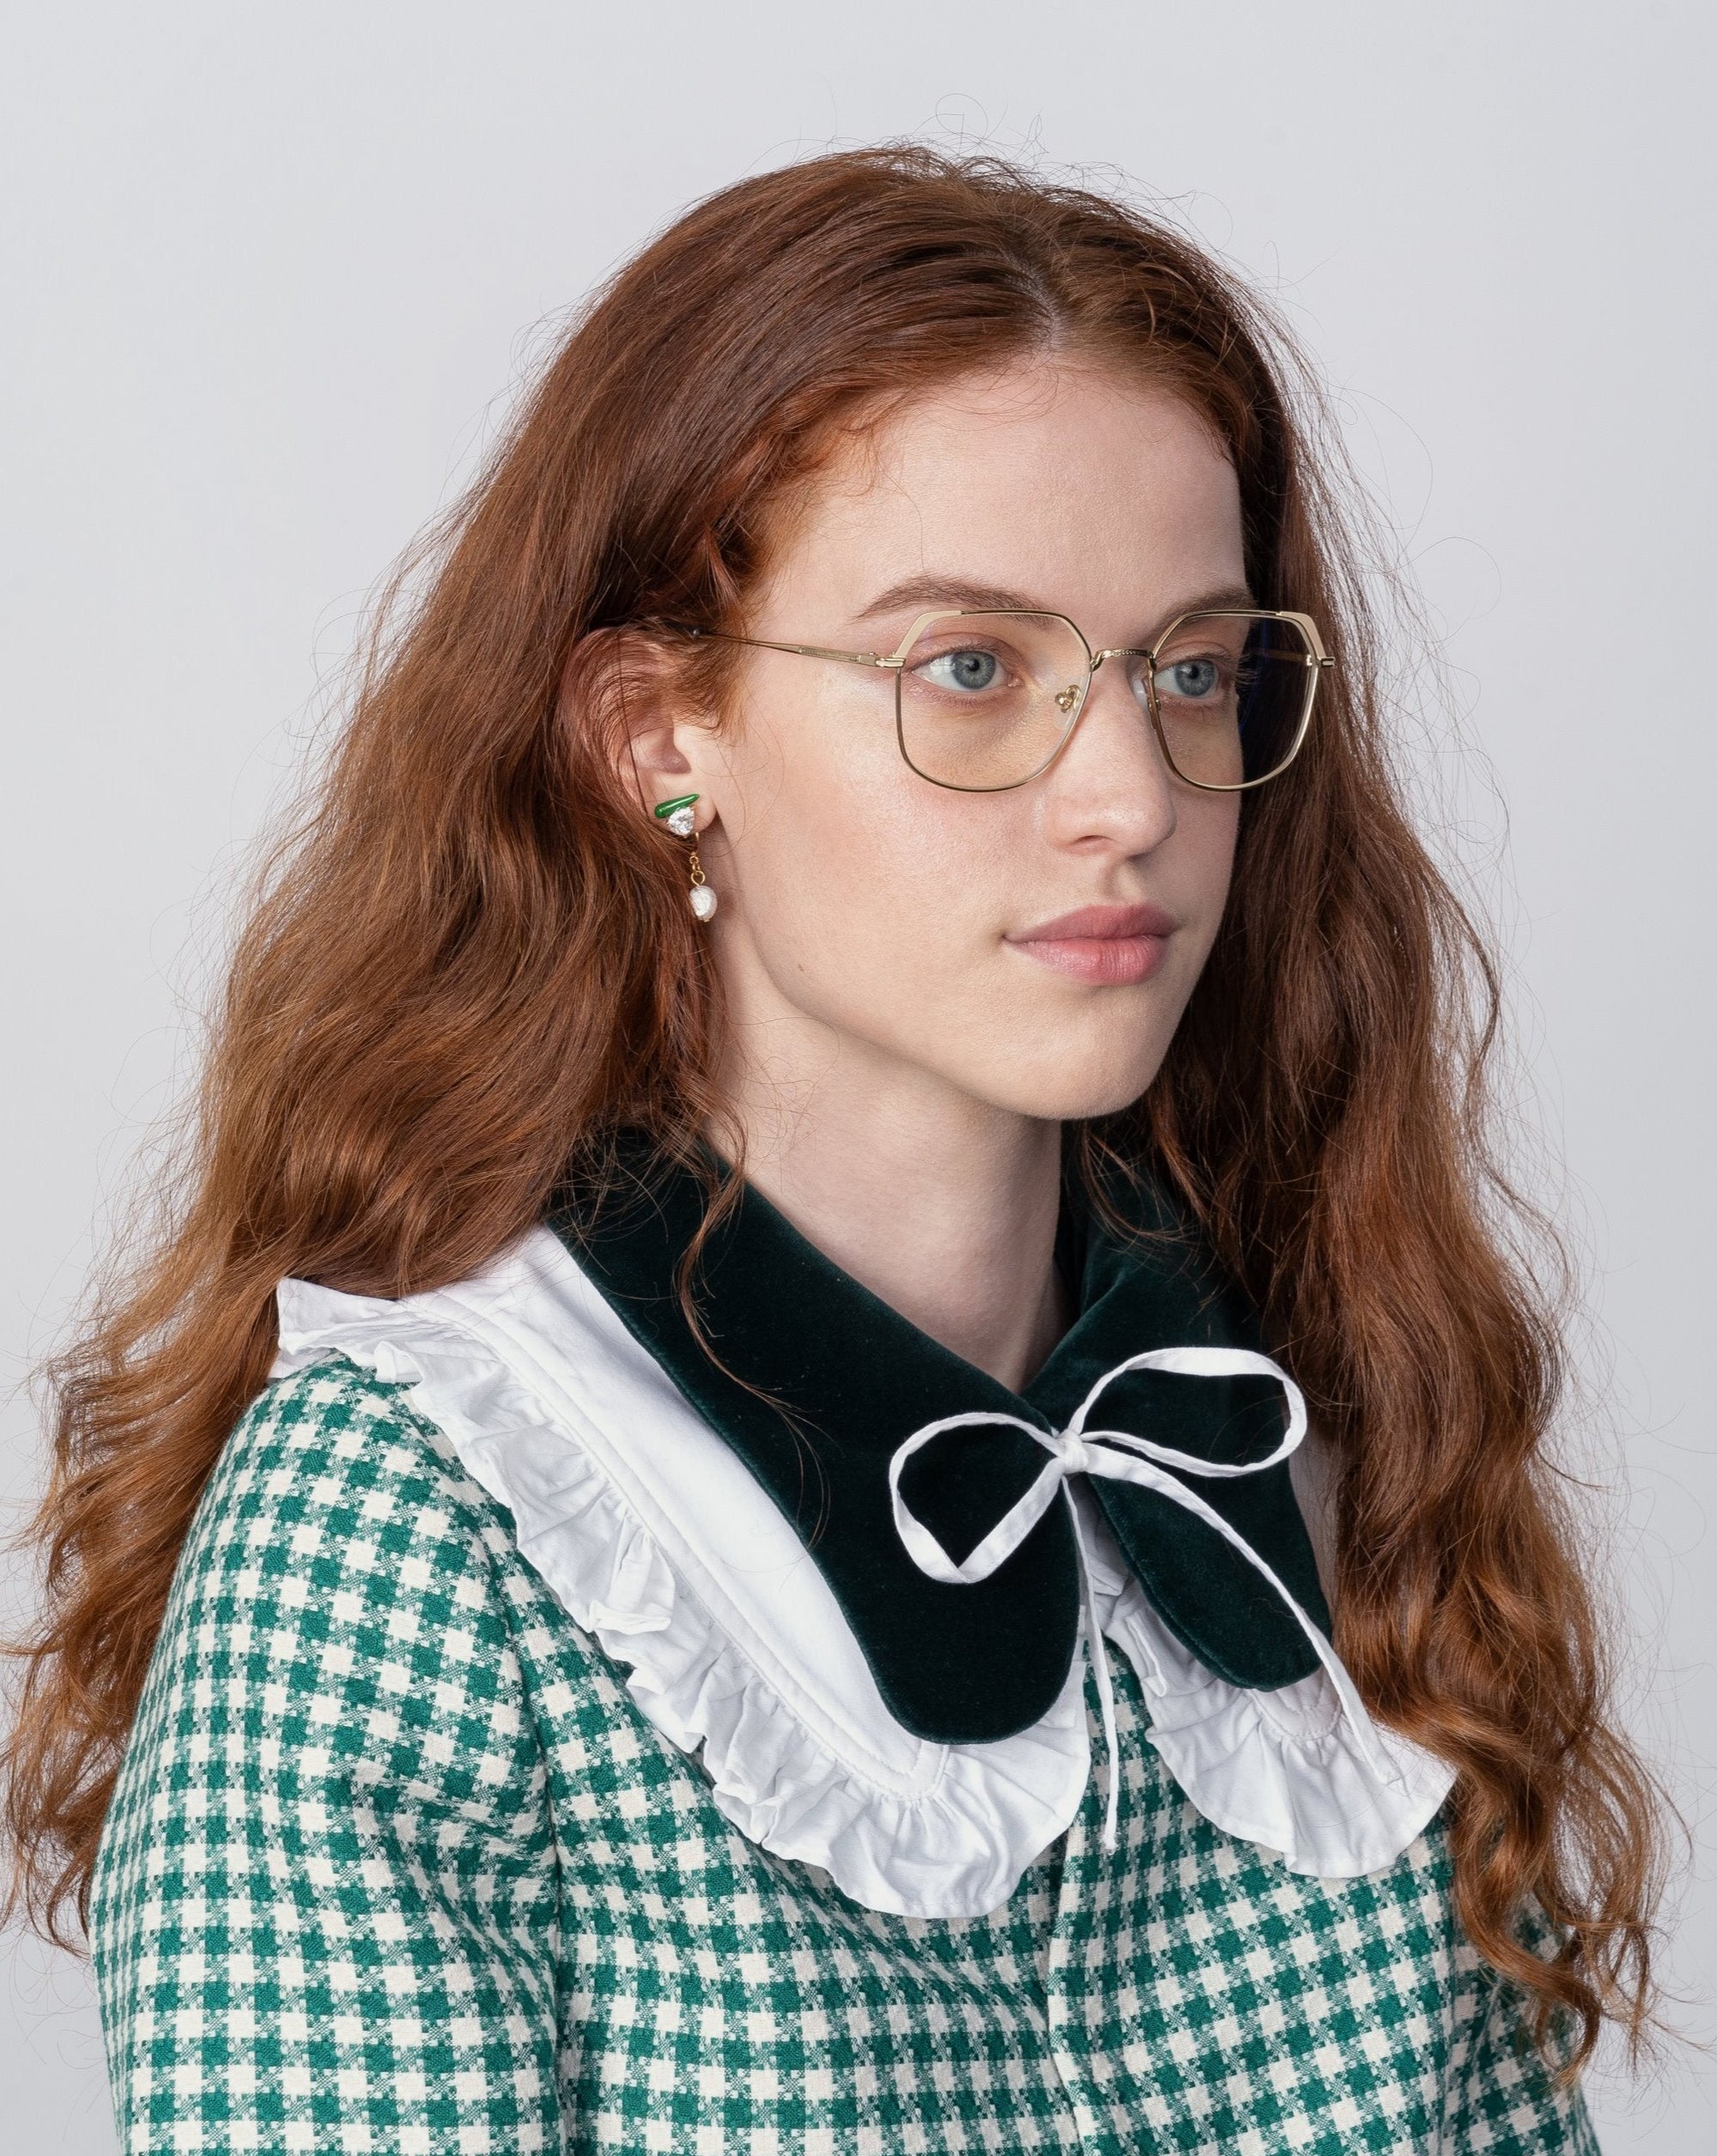 A young woman with long, wavy red hair is wearing Godiva gold-framed glasses with a blue light filter from For Art's Sake® and a green and white houndstooth dress with a large black and white ruffled collar. She is looking slightly to the side against a plain background.